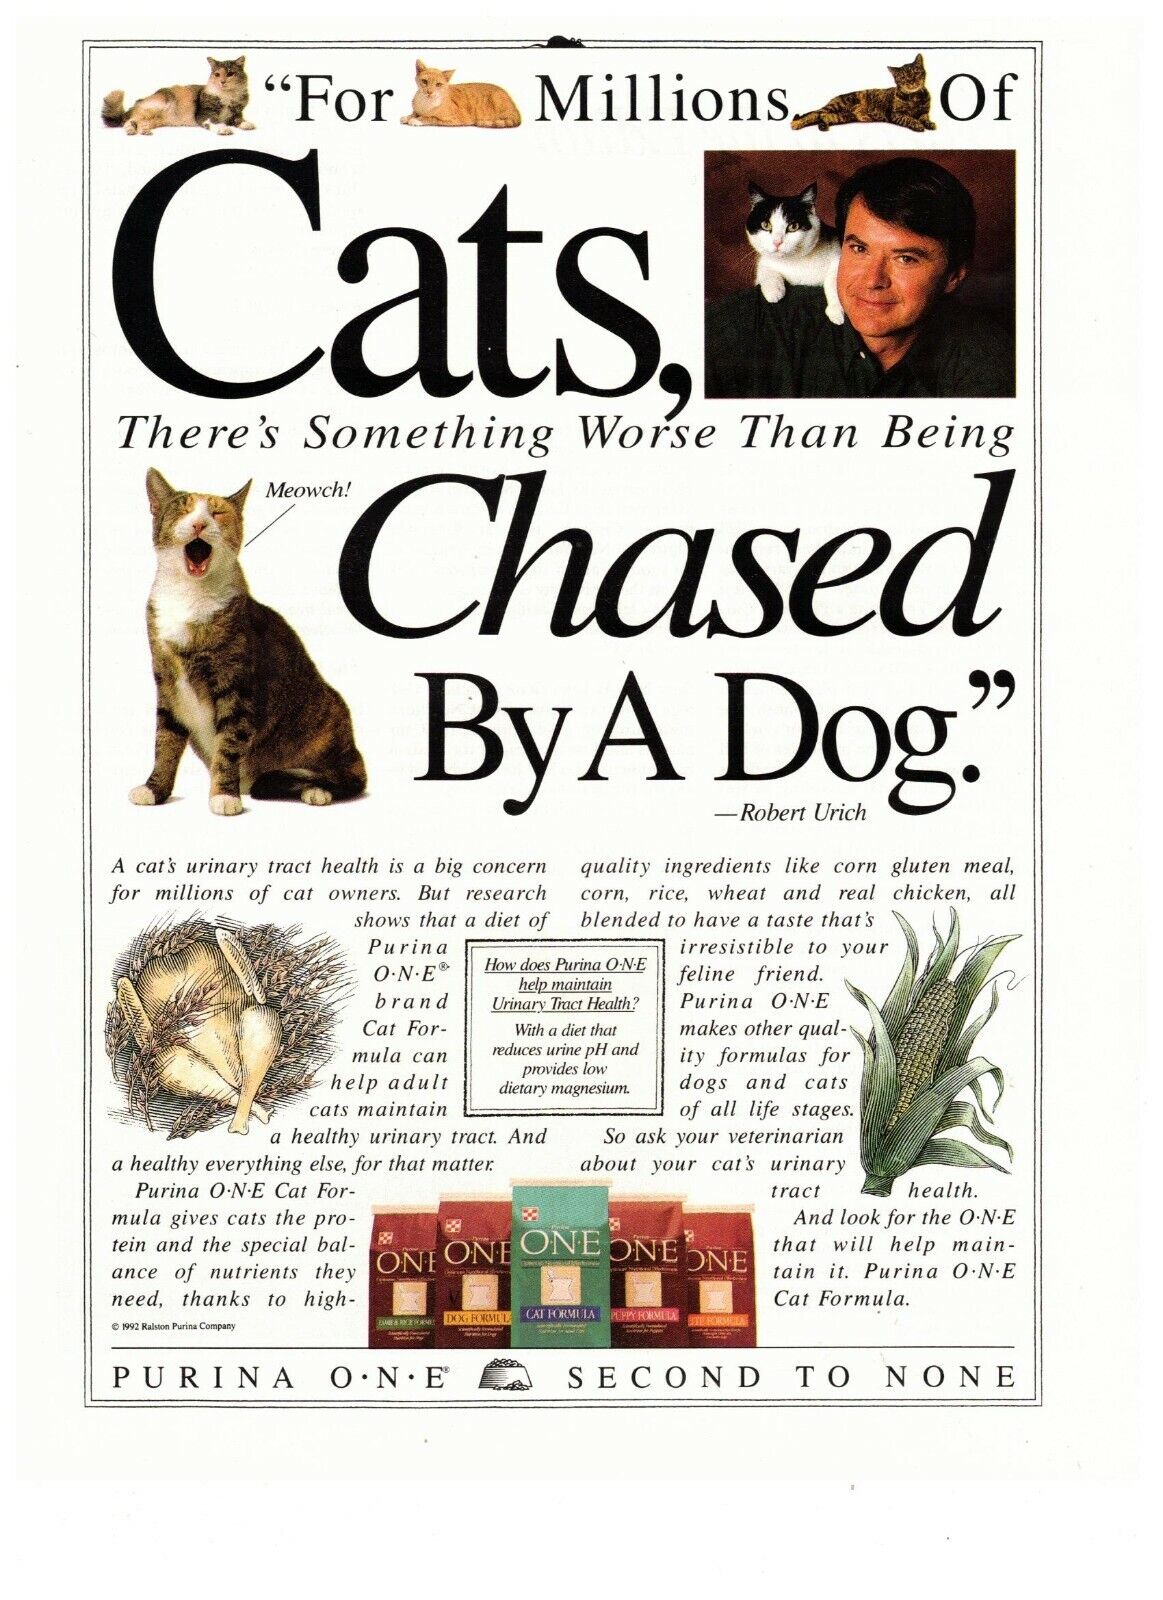 Purina One Cats Chased By a Dog Nutrition Vintage 1995 Print Ad